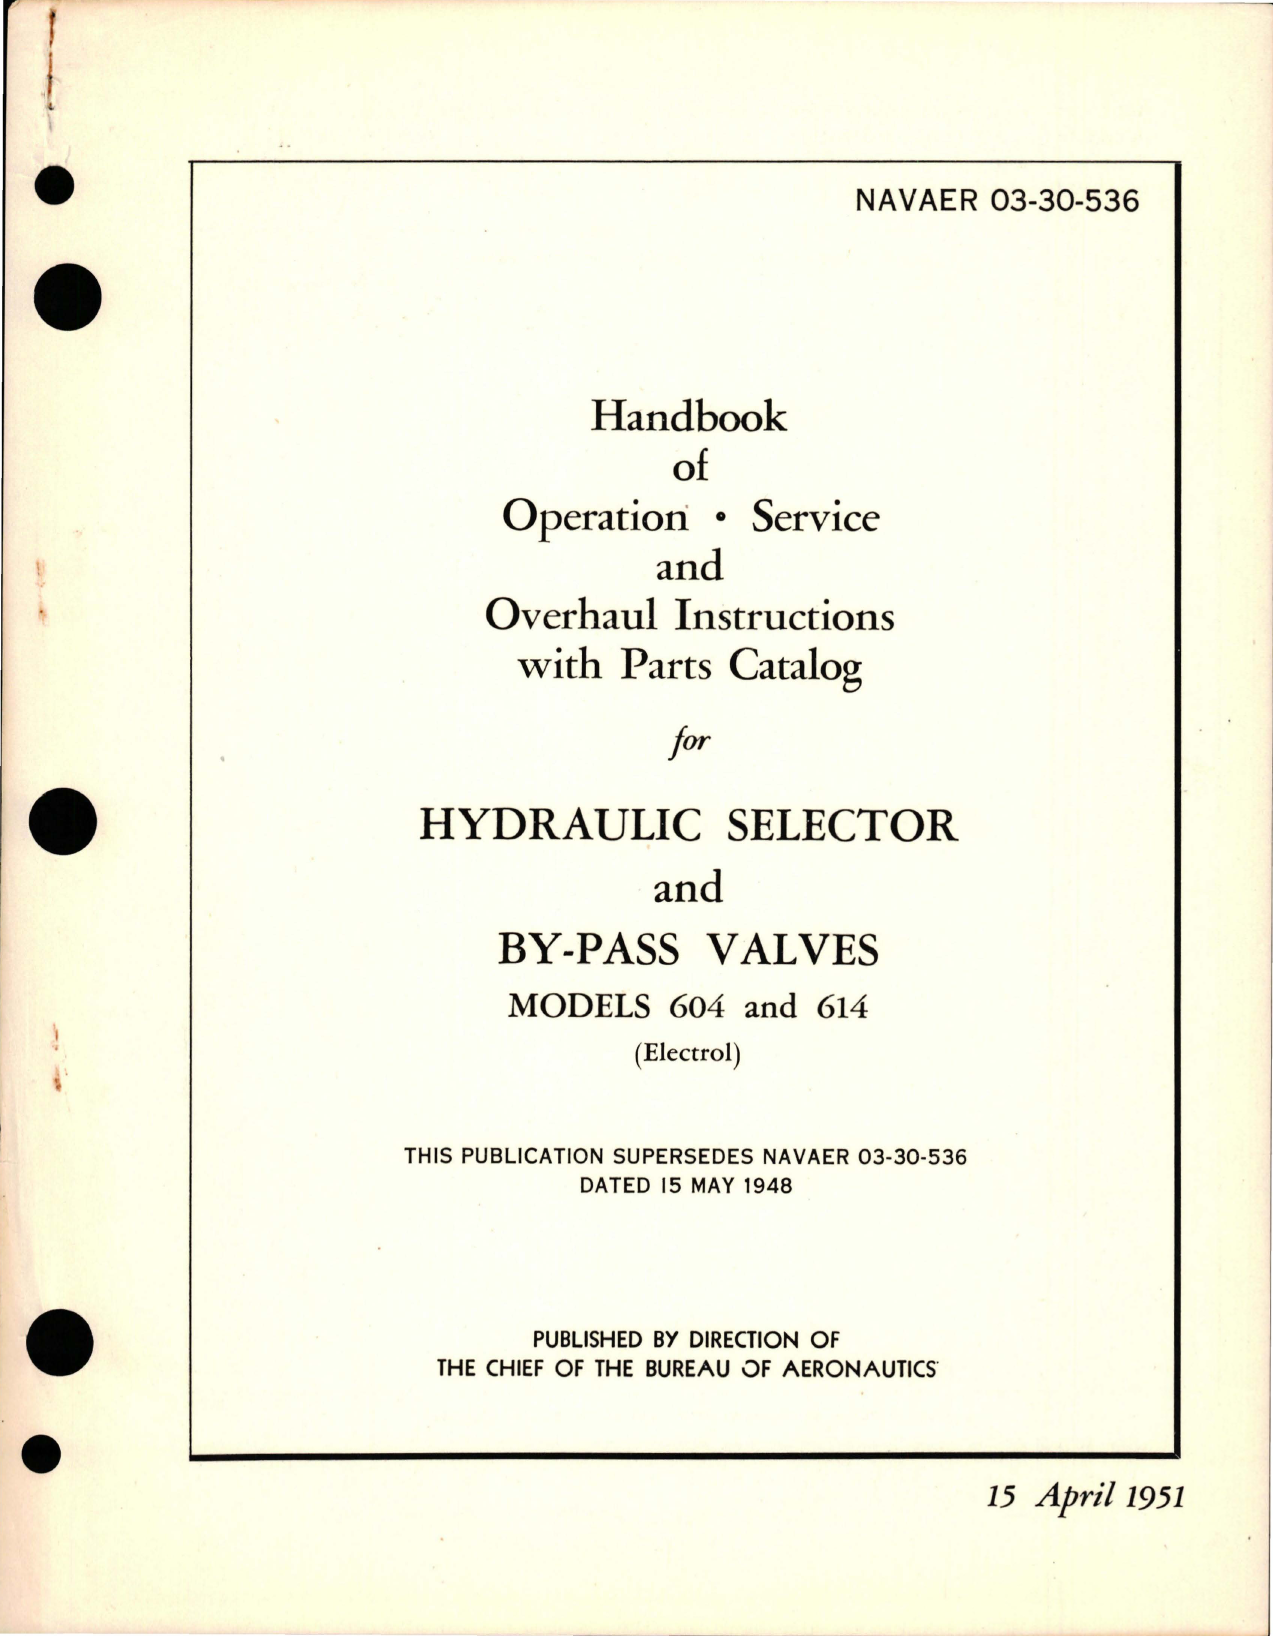 Sample page 1 from AirCorps Library document: Operation, Service and Overhaul Instructions with Parts Catalog for Hydraulic Selector & By-Pass Valves - Models 604 and 614 